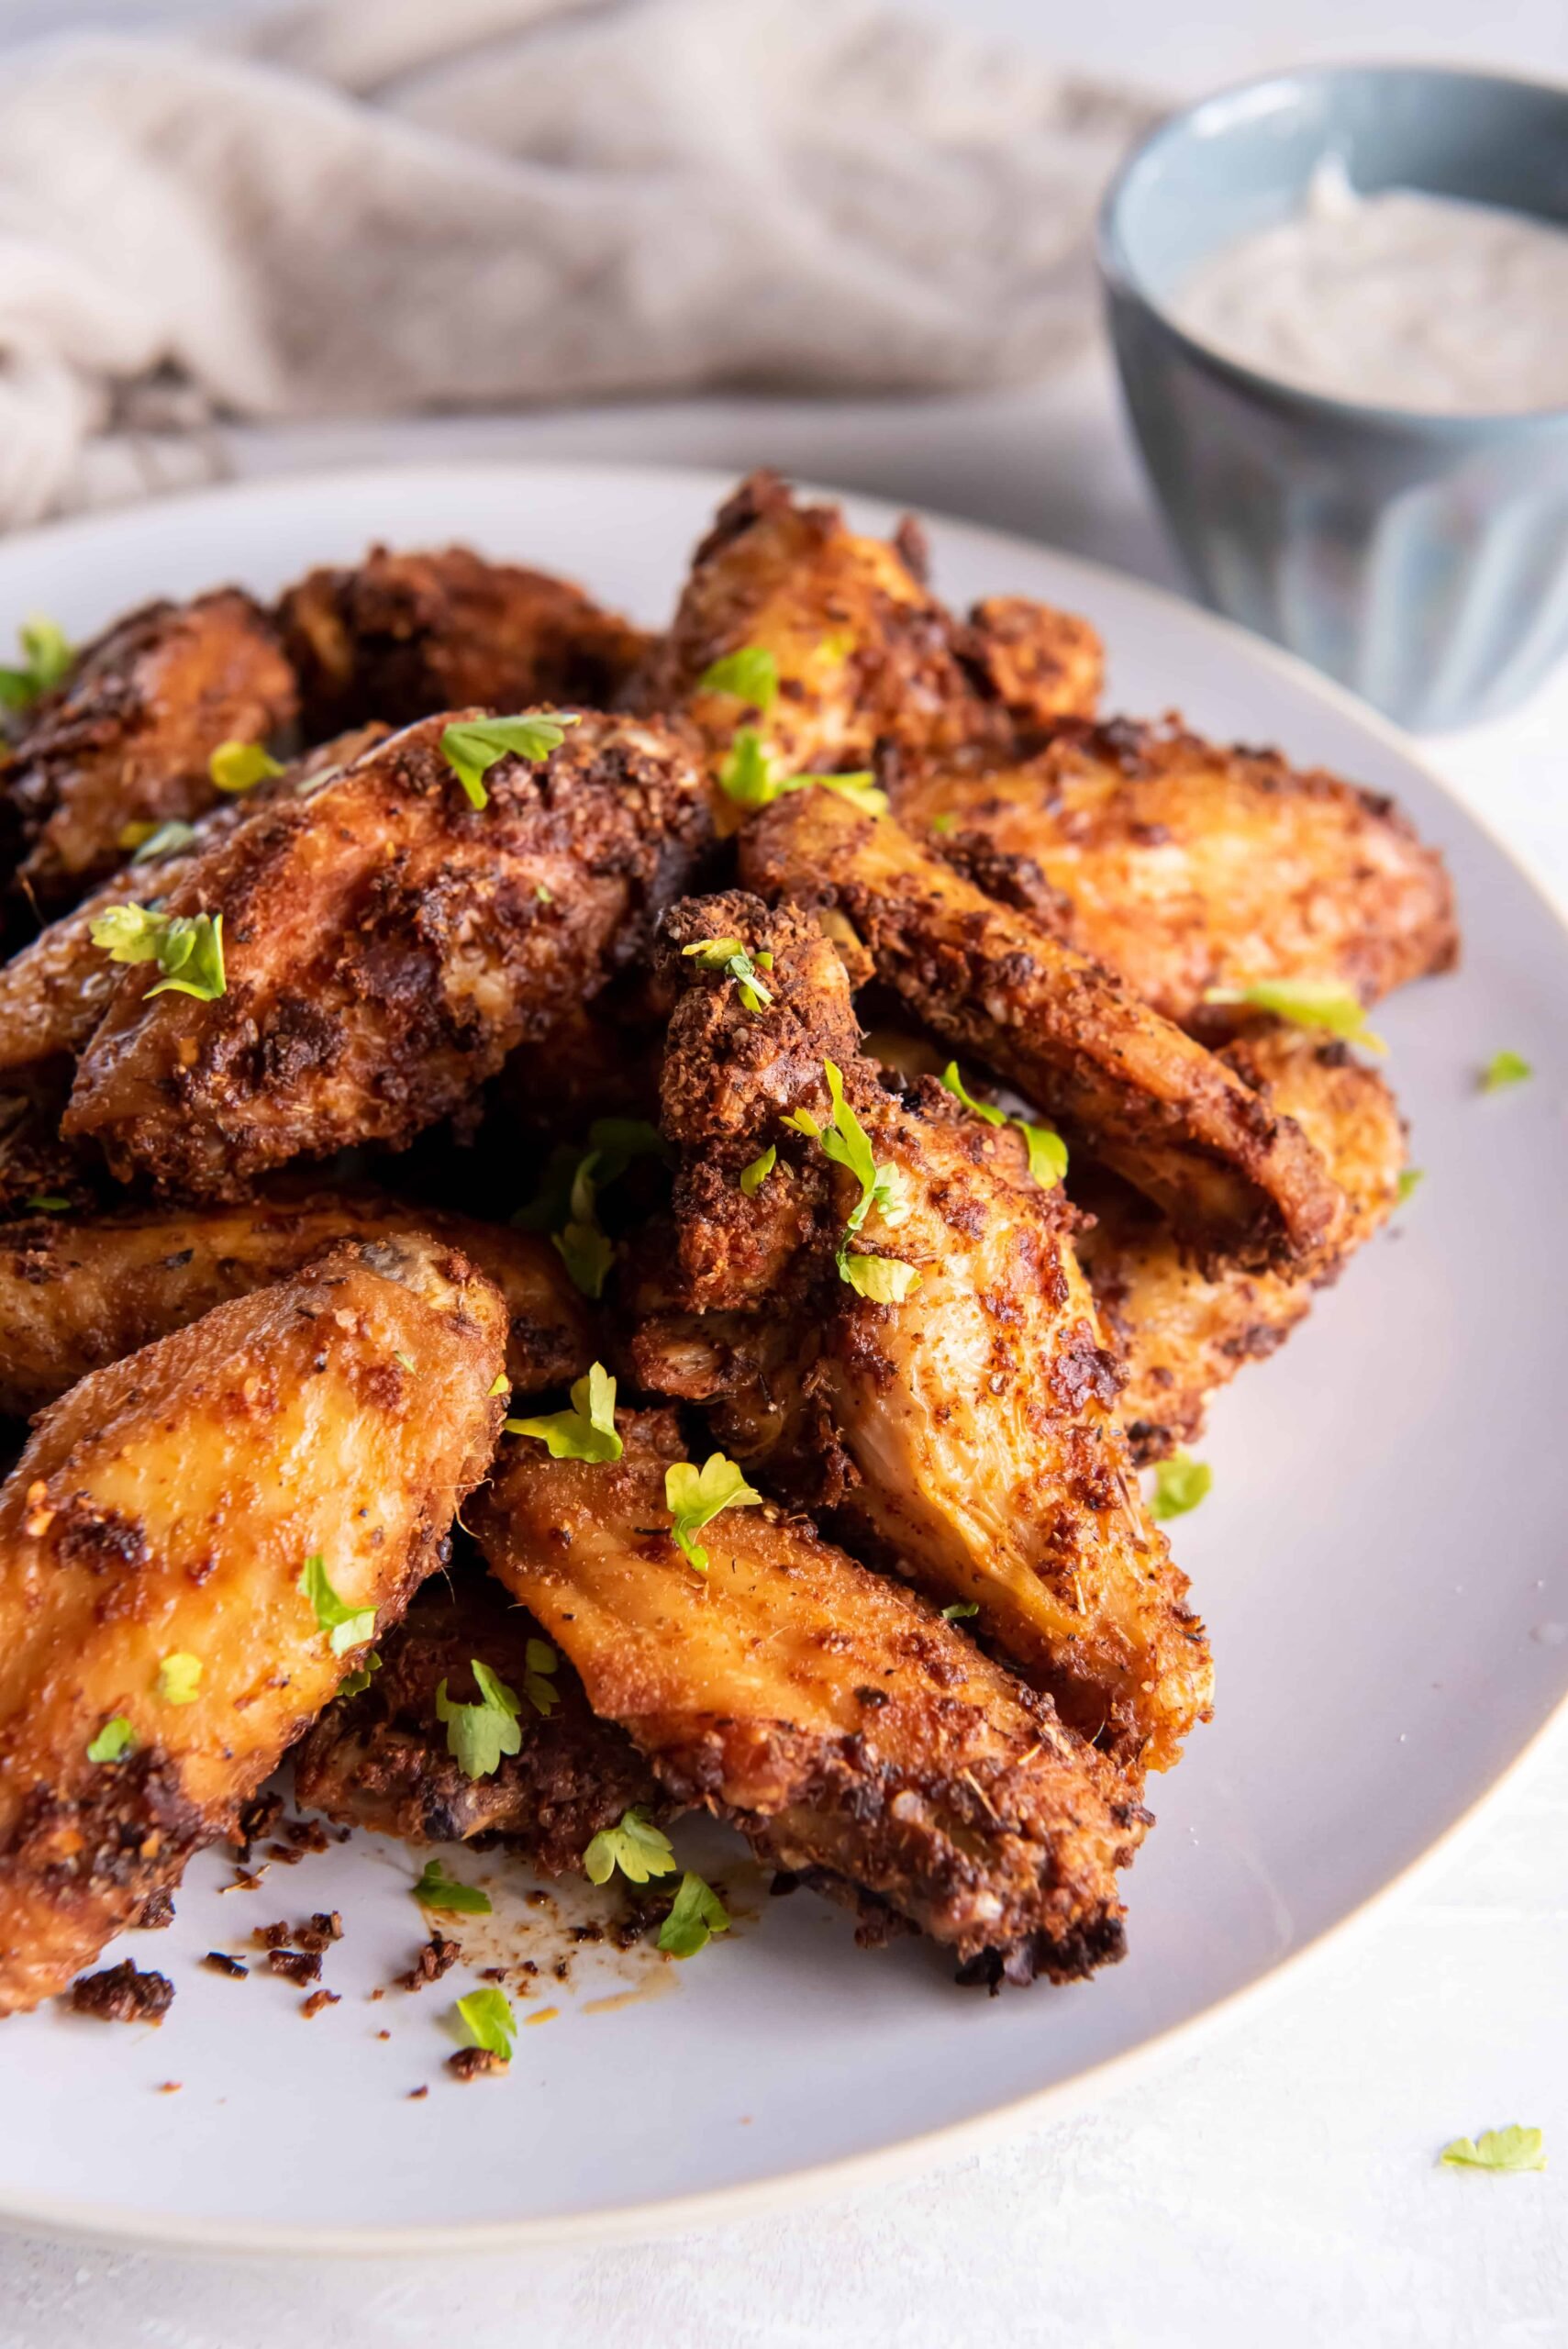 https://www.everydayfamilycooking.com/wp-content/uploads/2023/04/air-fryer-chicken-wings-with-dry-rub-07-1-scaled.jpg